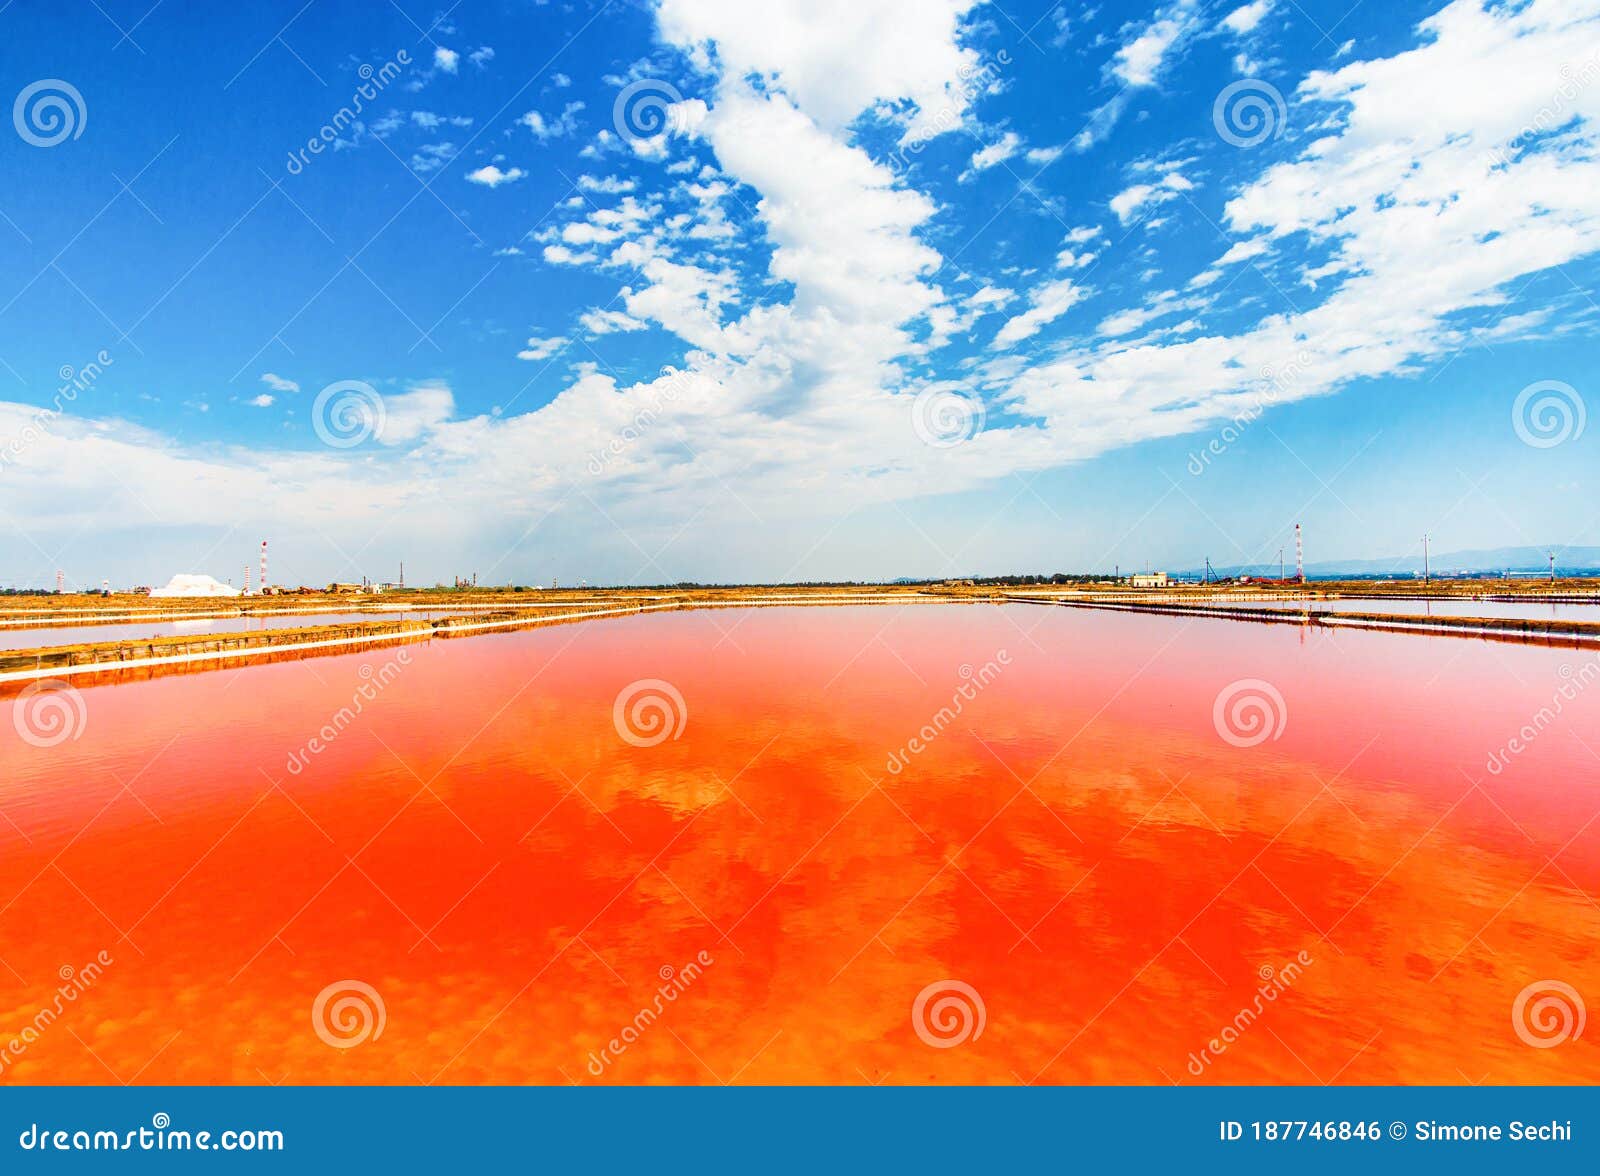 red salt lake with cloudy sky reflection